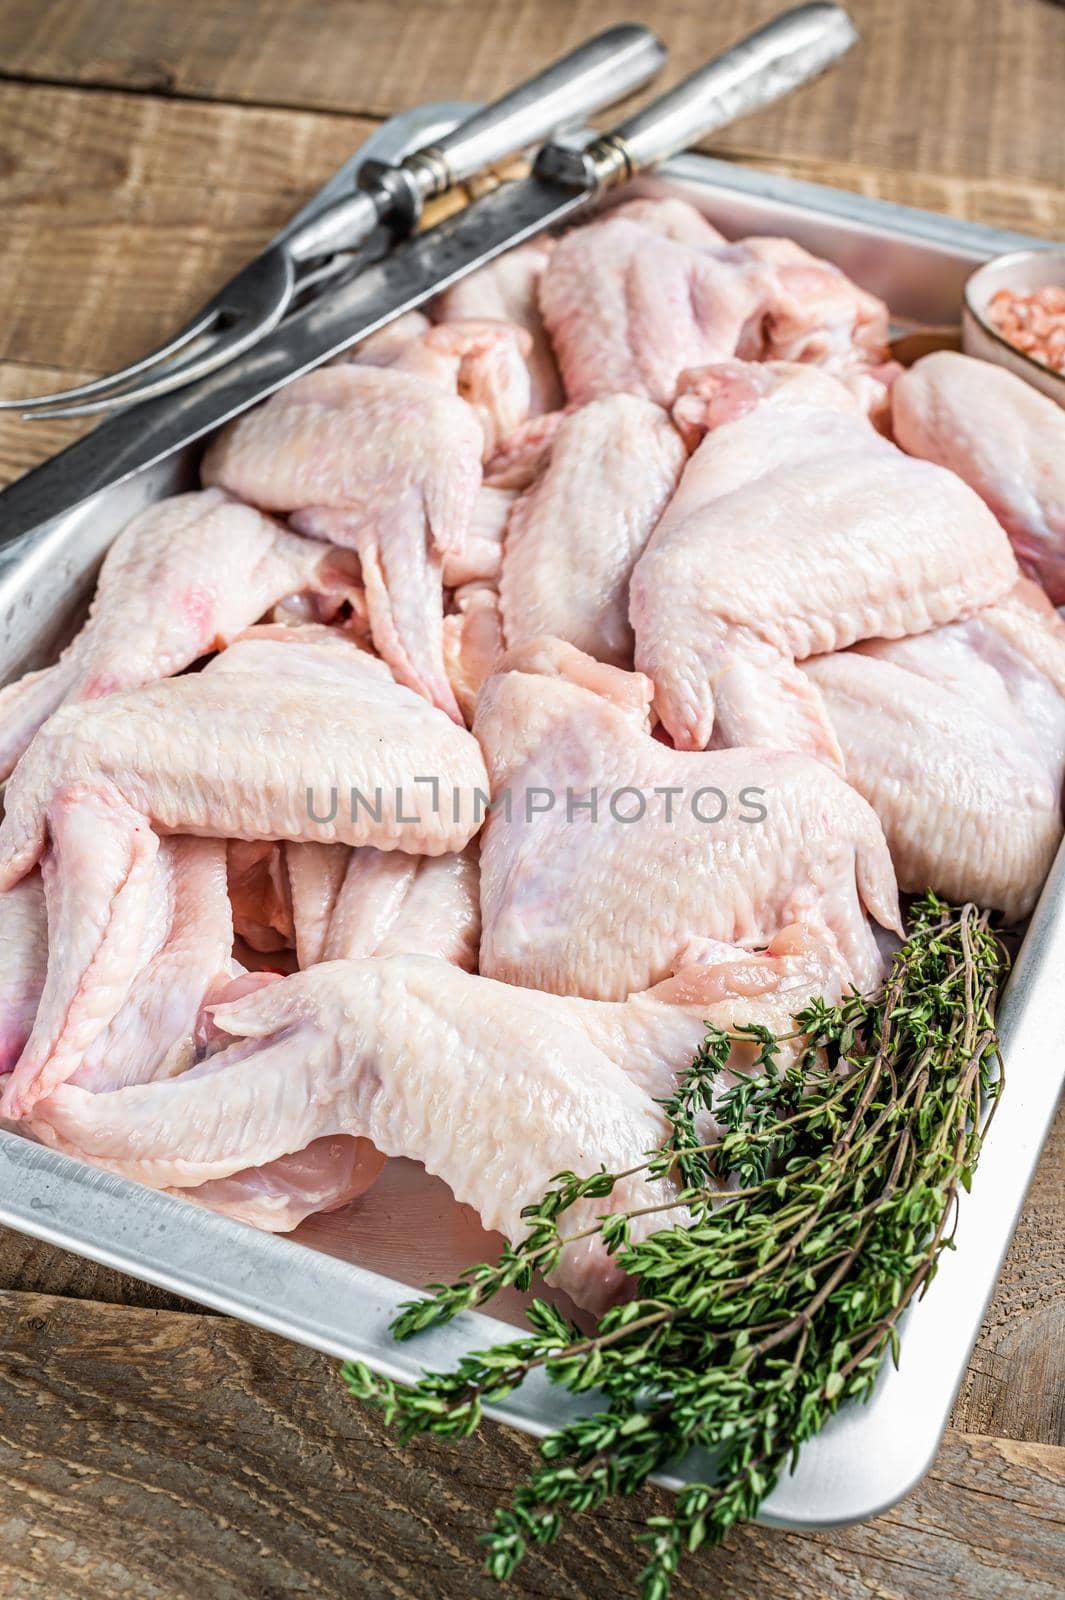 Fresh Raw chicken wings Poultry meat in a kitchen tray with herbs. Wooden background. Top view.